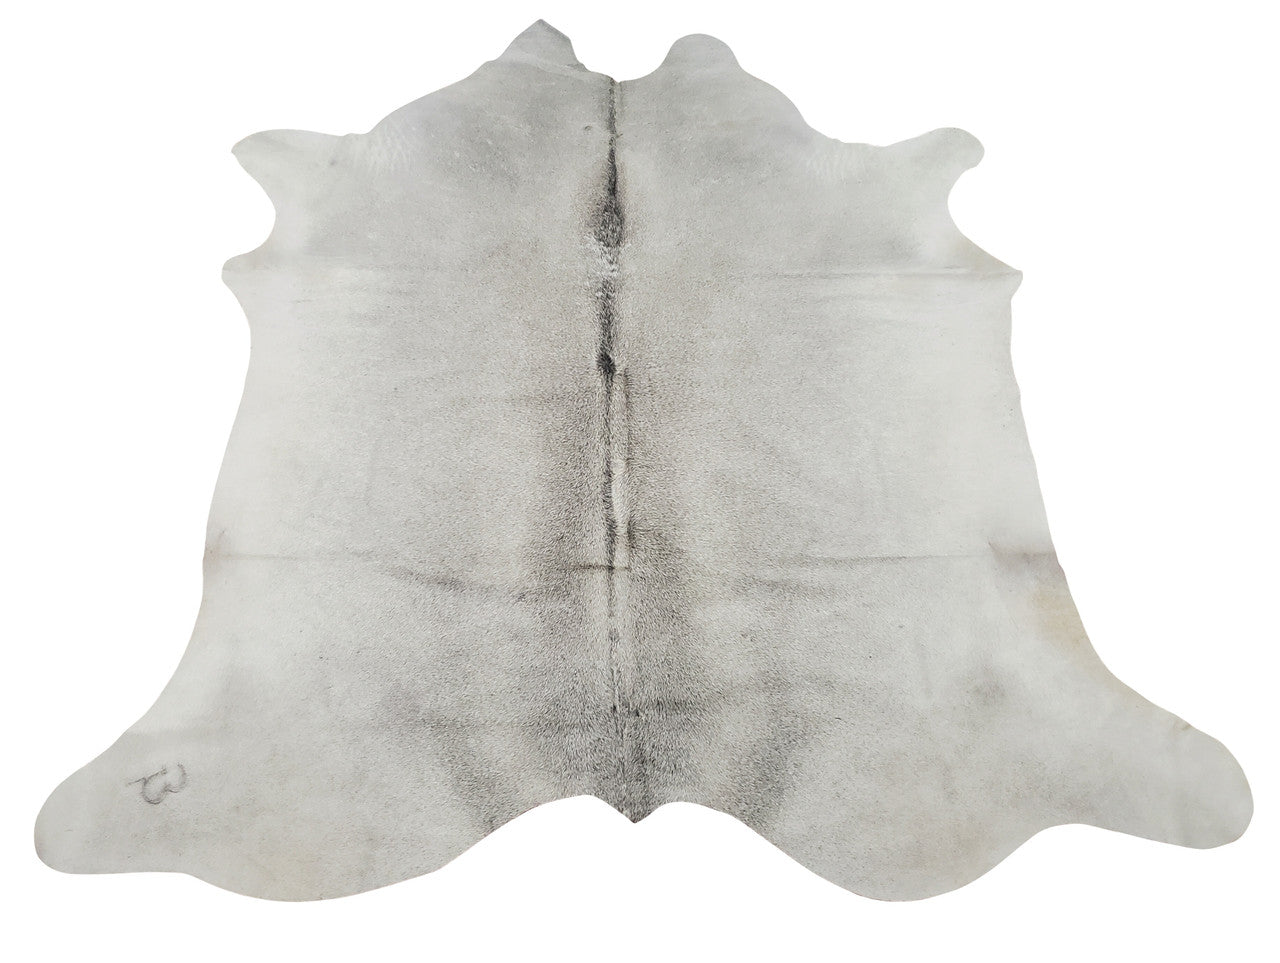 Transform any small space into a cozy oasis with our gray cowhide rugs! Perfect for those with limited energy and exhausting schedules; add comfort and style to any room!